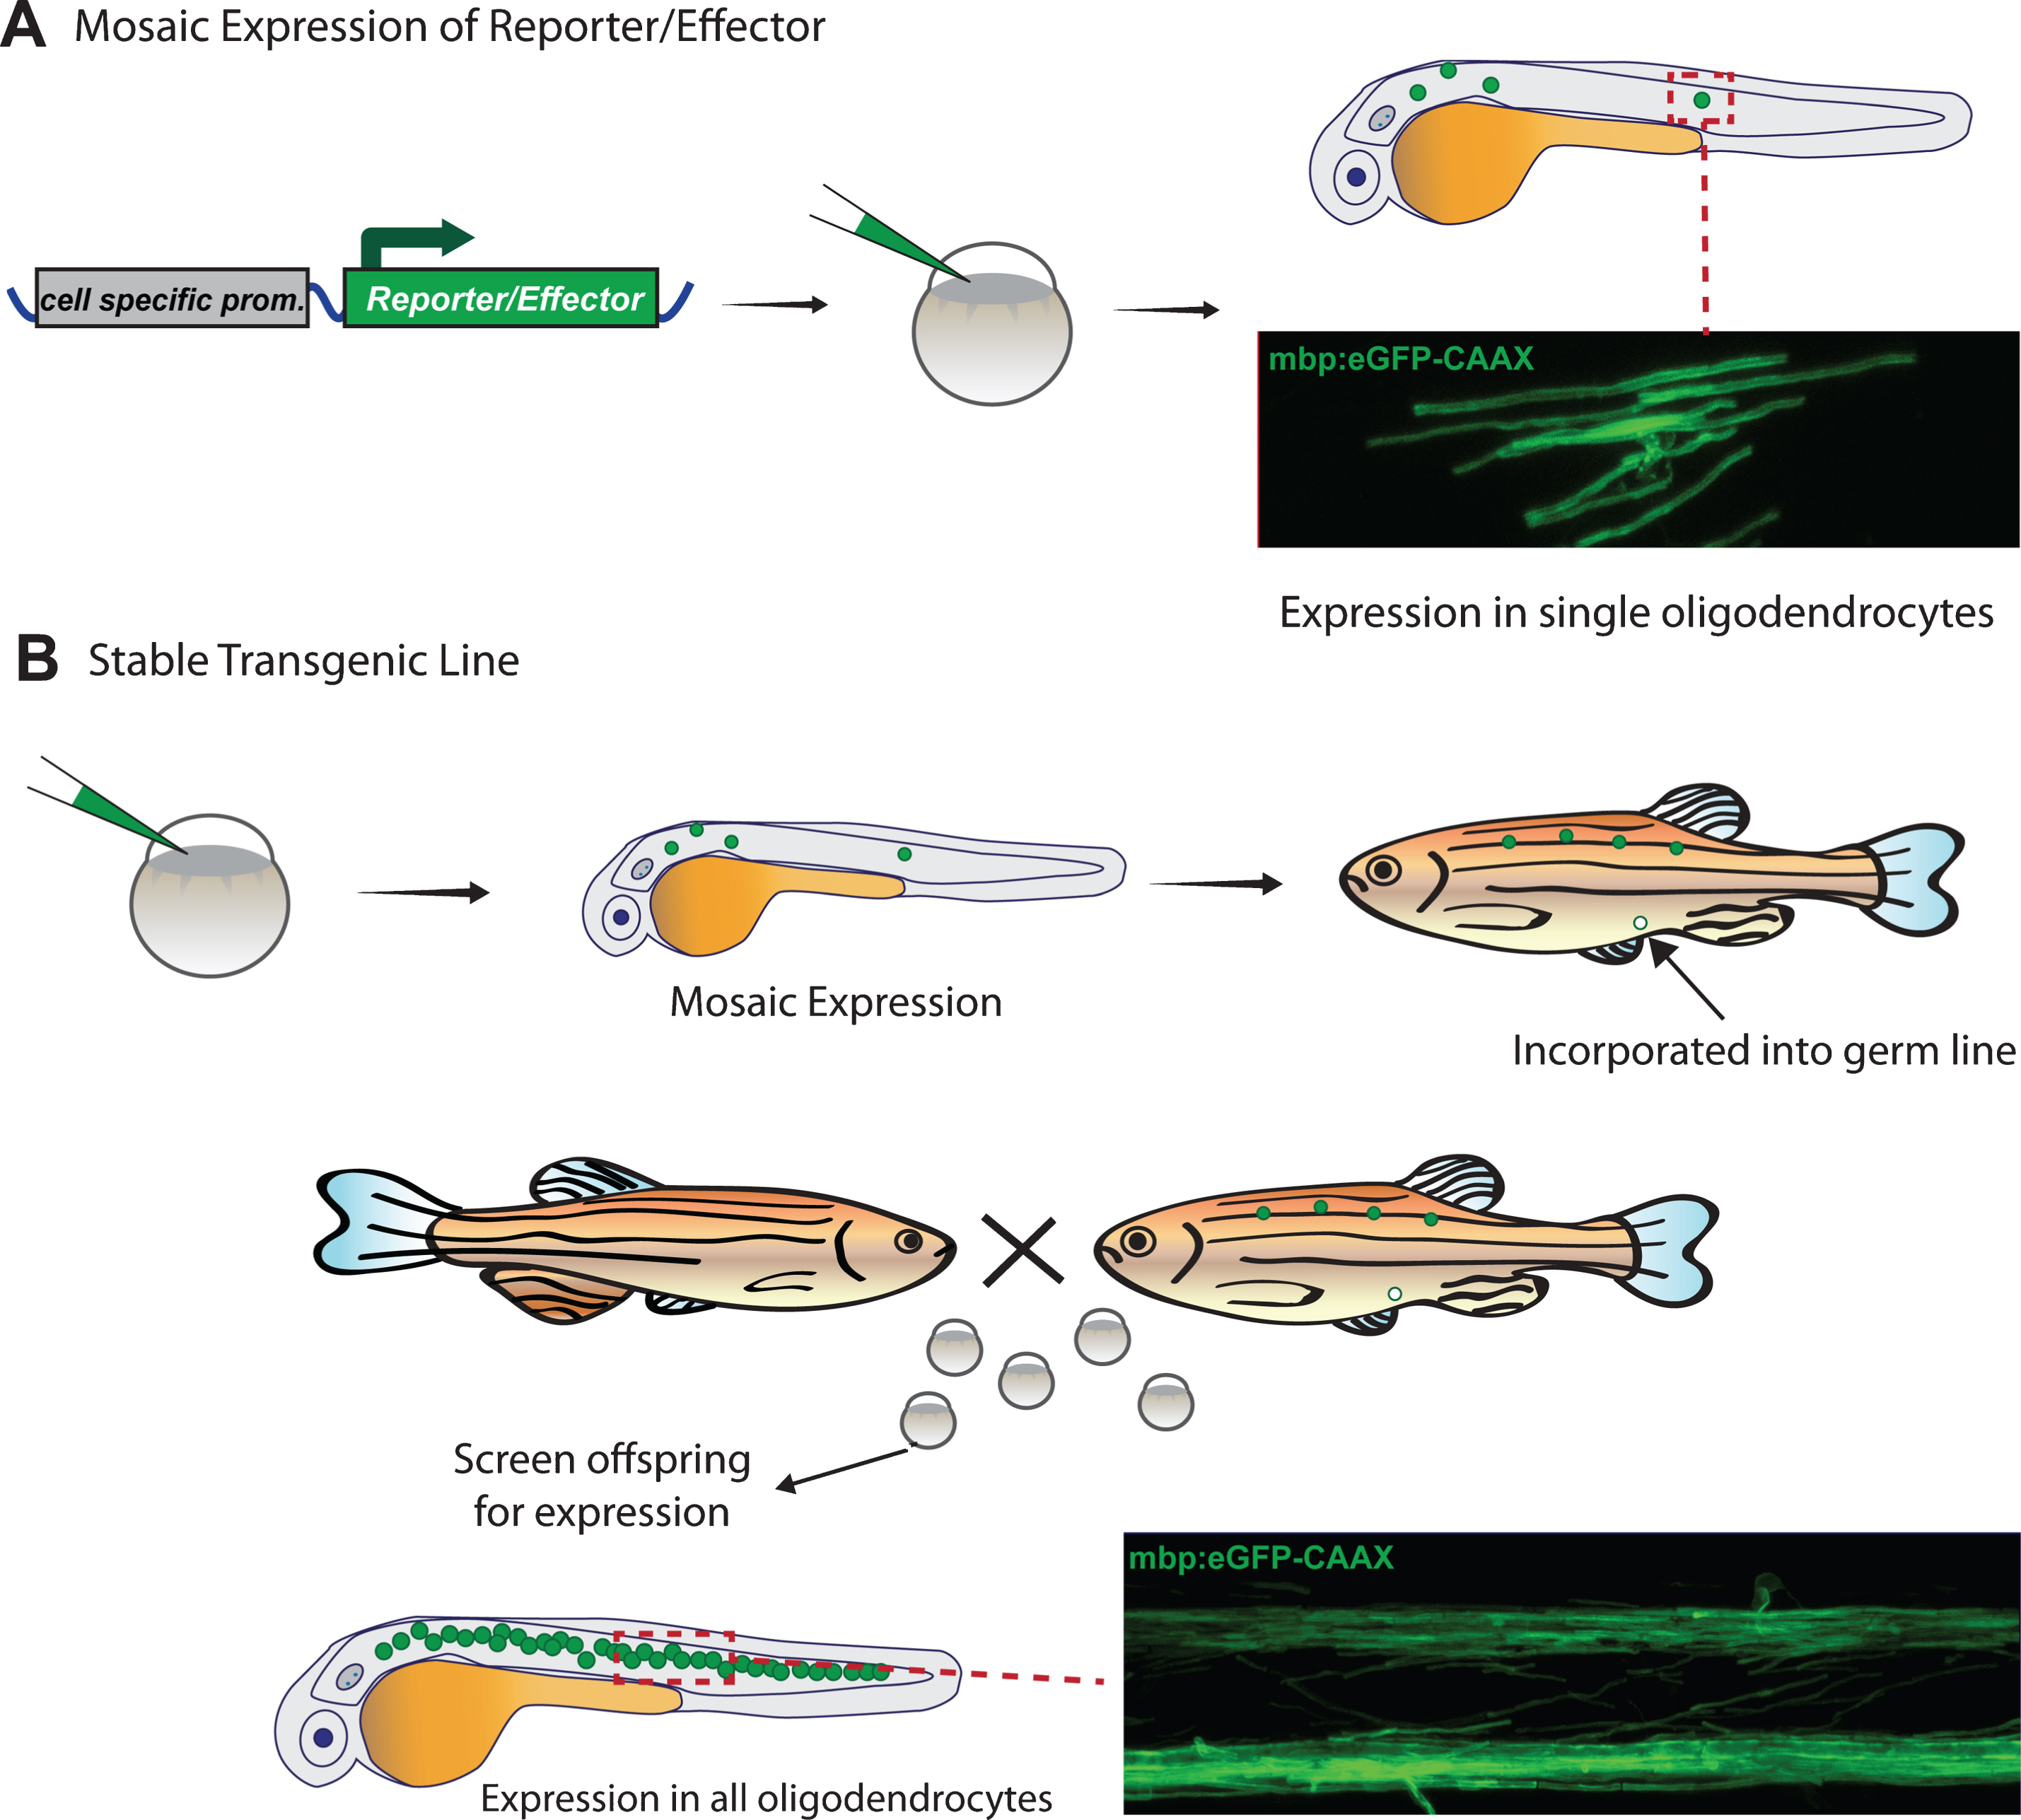 Generation of transgenic zebrafish to visualize myelinating oligodendrocytes. A) Transgenic animals with mosaic fluorescent reporter expression in myelinating oligodendrocytes can be generated by injection of plasmid at the one cell stage, and visualized in the injected animals at early larval stages. B) Transgenic animals with stable expression of a transgene that labels all myelin in the animal are first injected with plasmid as in A, then grown to adulthood. Adults are bred with non-transgenic animals to identify those in which plasmid integration has occurred in the germ-line and which can generate offspring with expression in all myelinating oligodendrocytes.